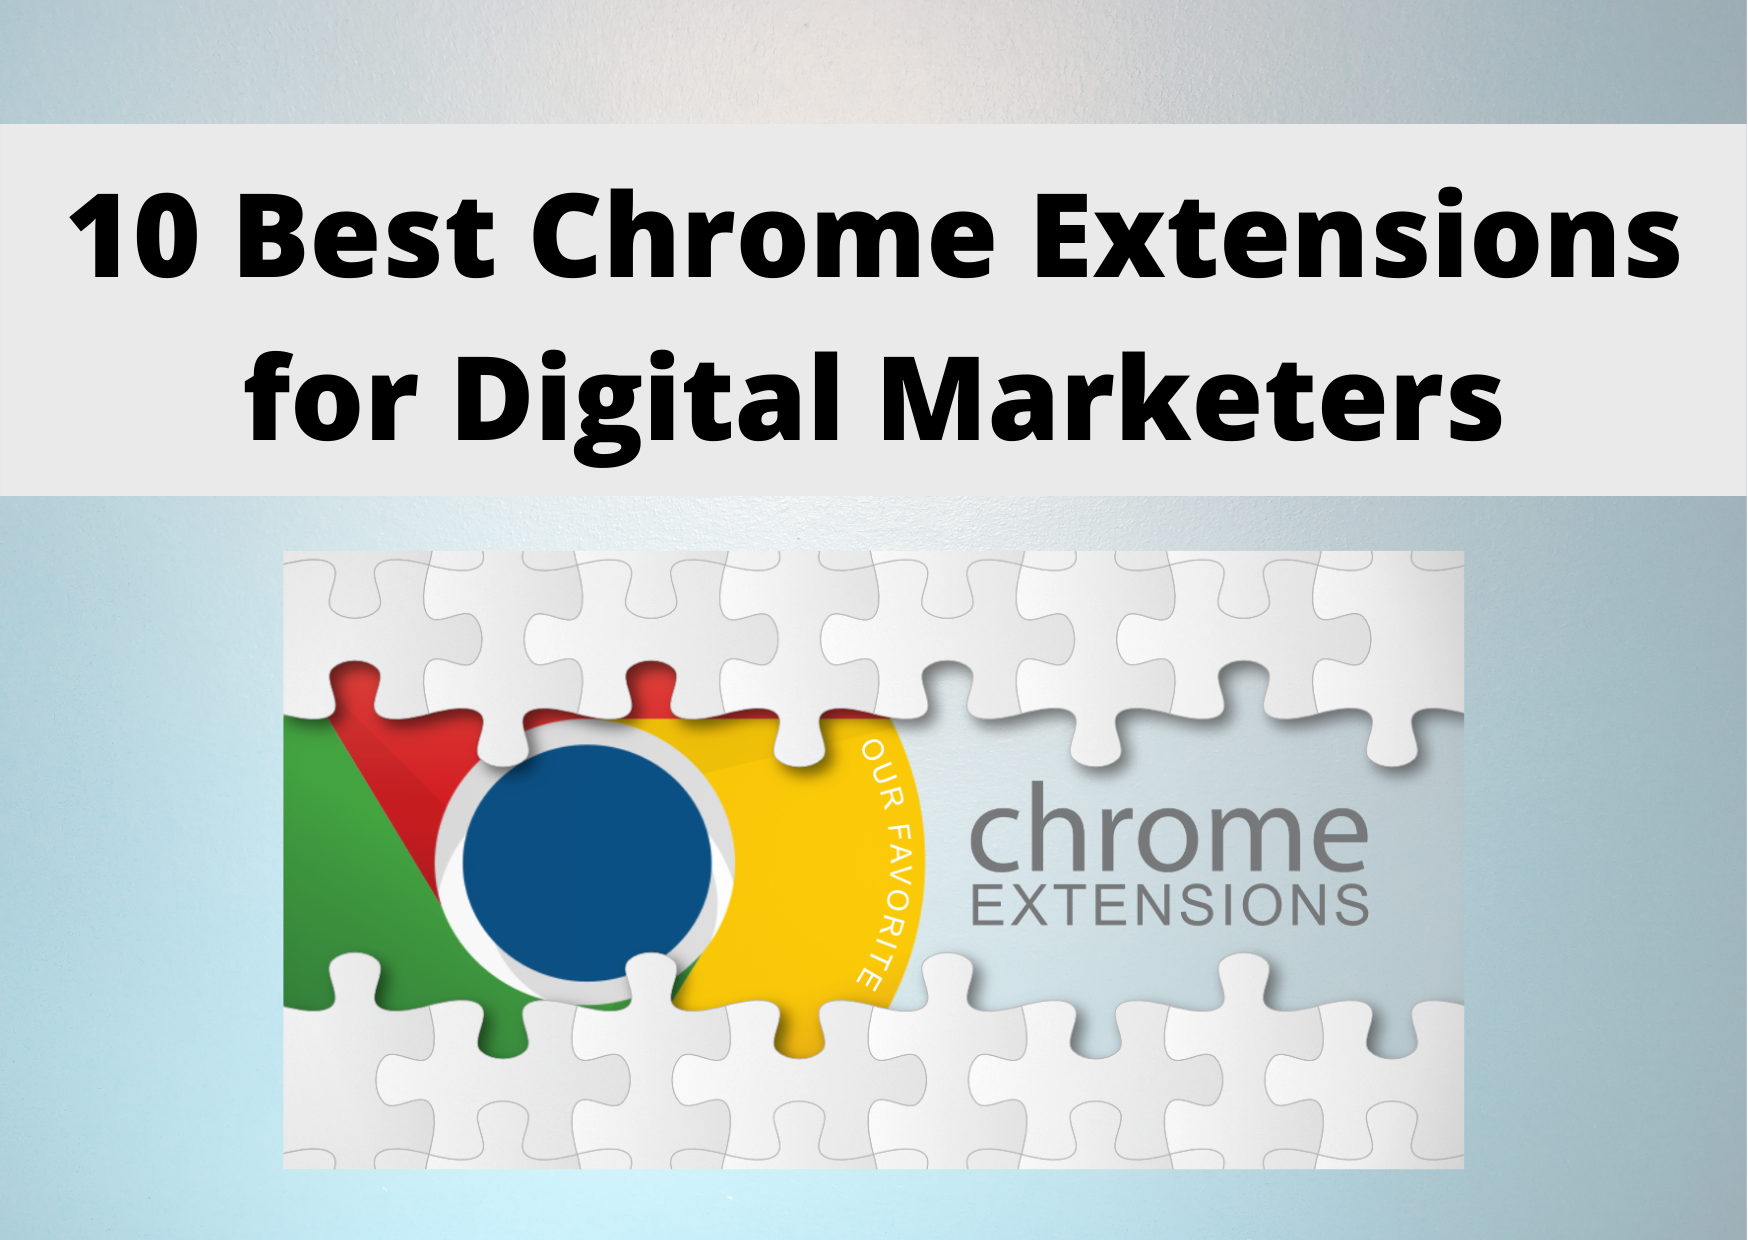 10 Best Chrome Extensions for Digital Marketers